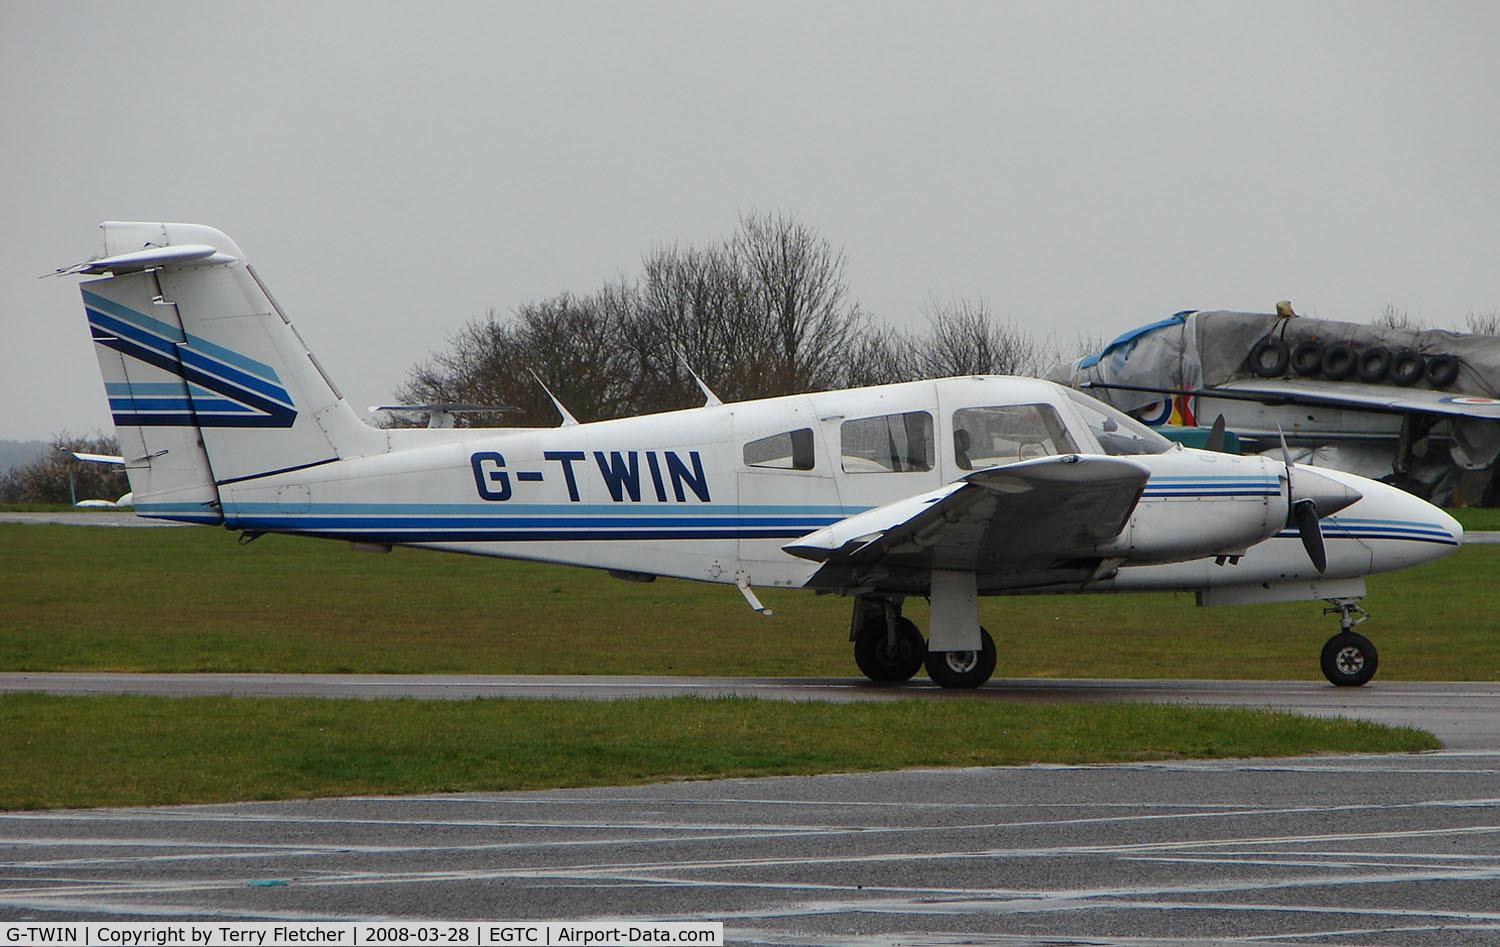 G-TWIN, 1978 Piper PA-44-180 Seminole C/N 44-7995072, Part of the General Aviation activity at Cranfield